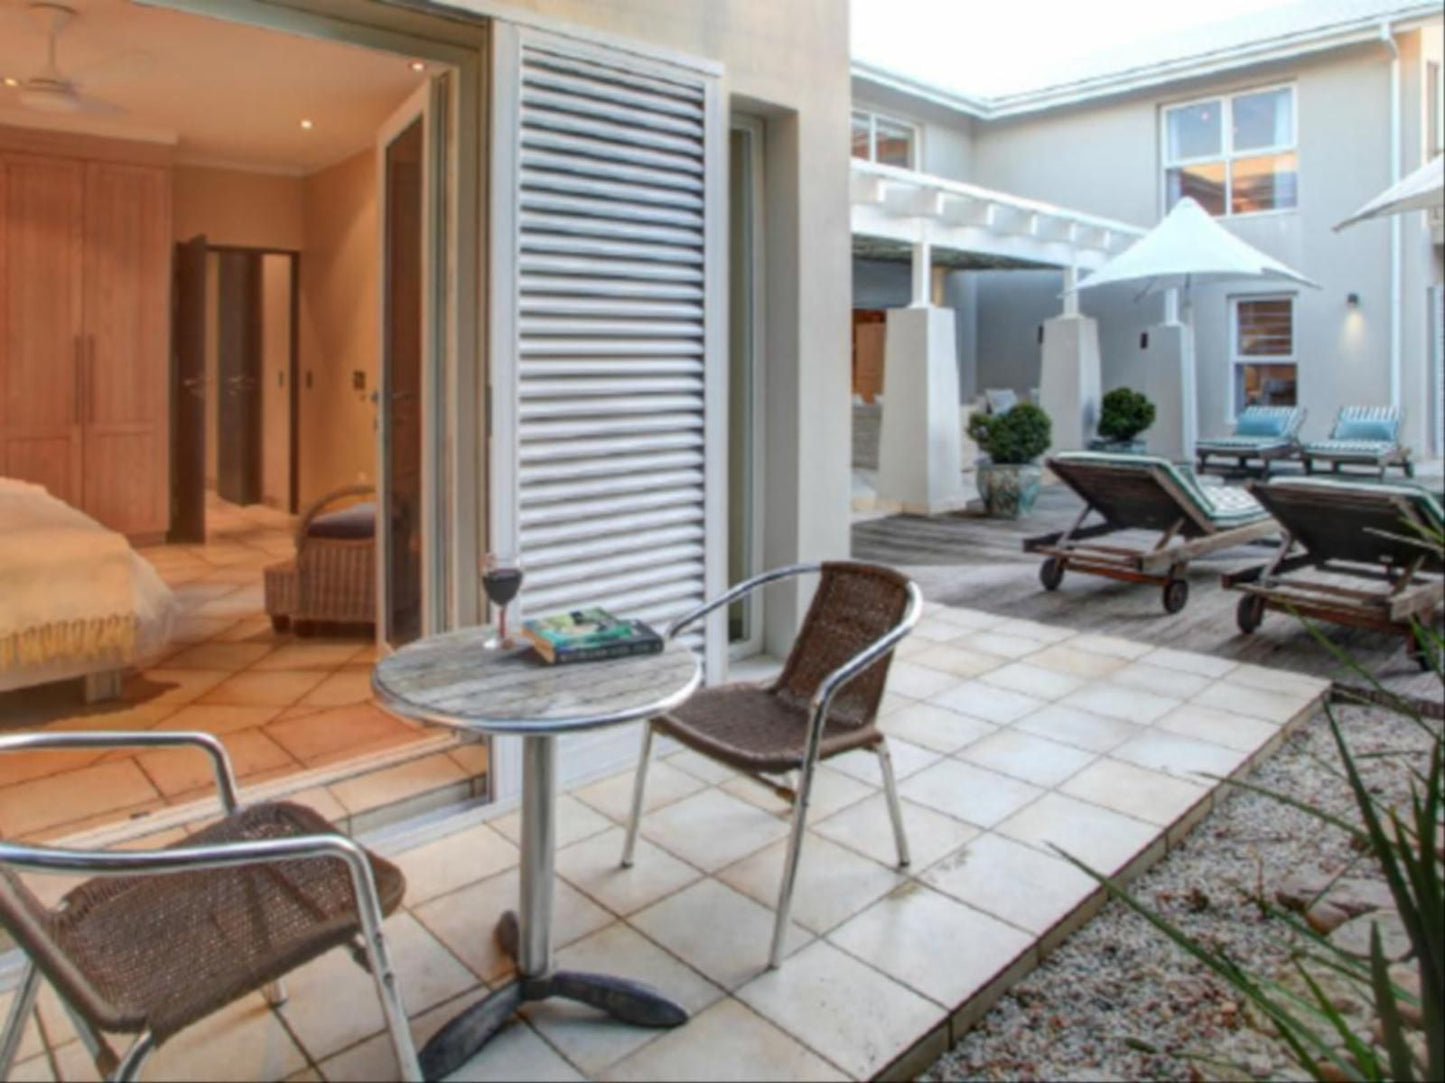 Starfish Lodge Plettenberg Bay Western Cape South Africa House, Building, Architecture, Living Room, Swimming Pool